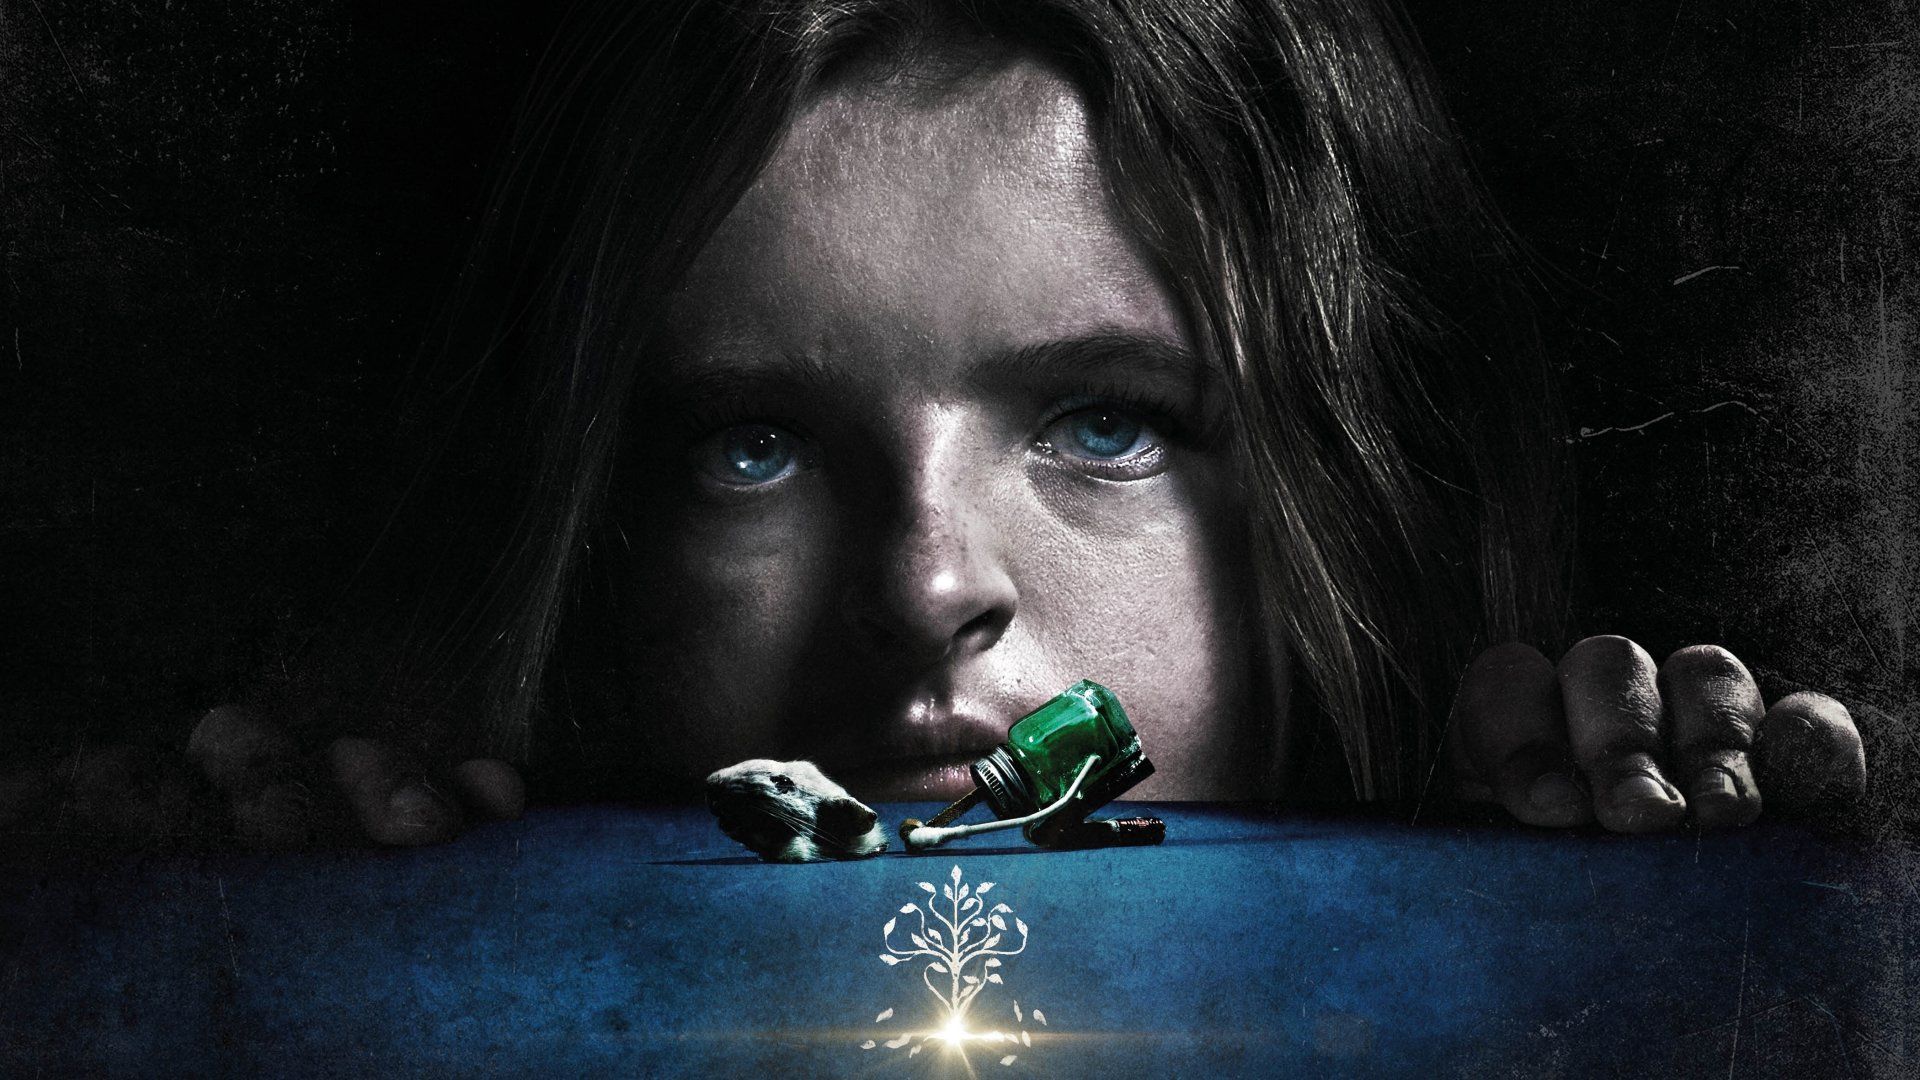 Hereditary is one of the most popular horror films